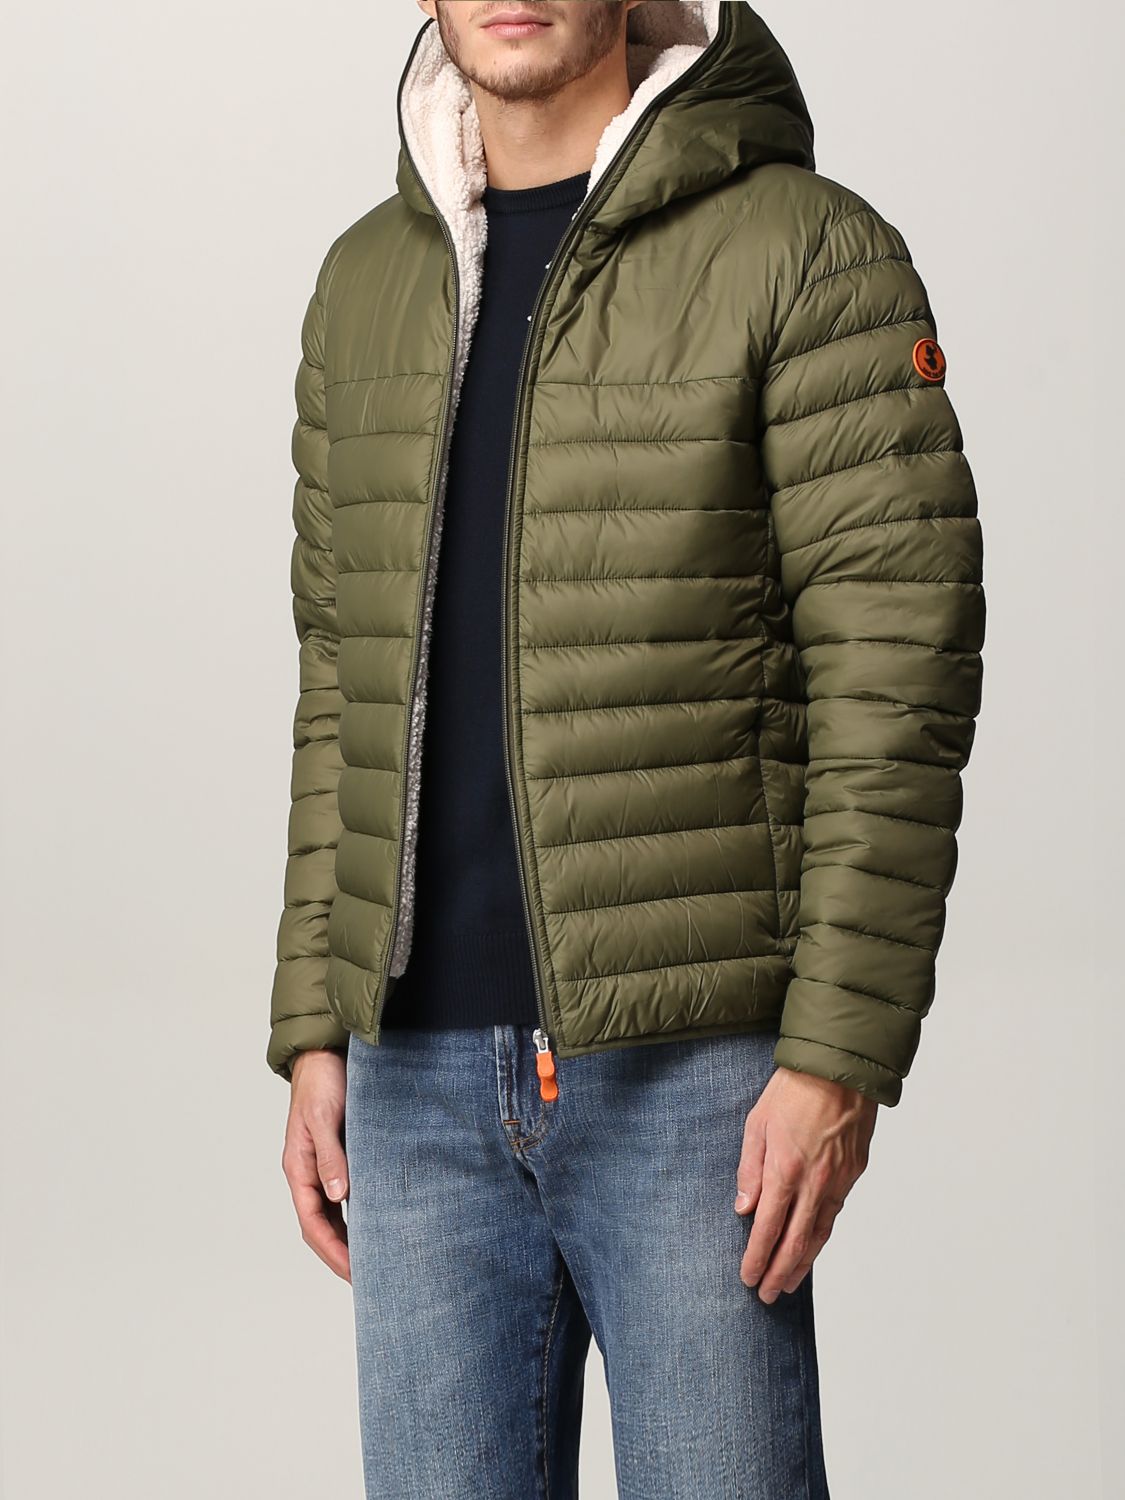 Jacket Save The Duck: Save The Duck jacket for man green 3